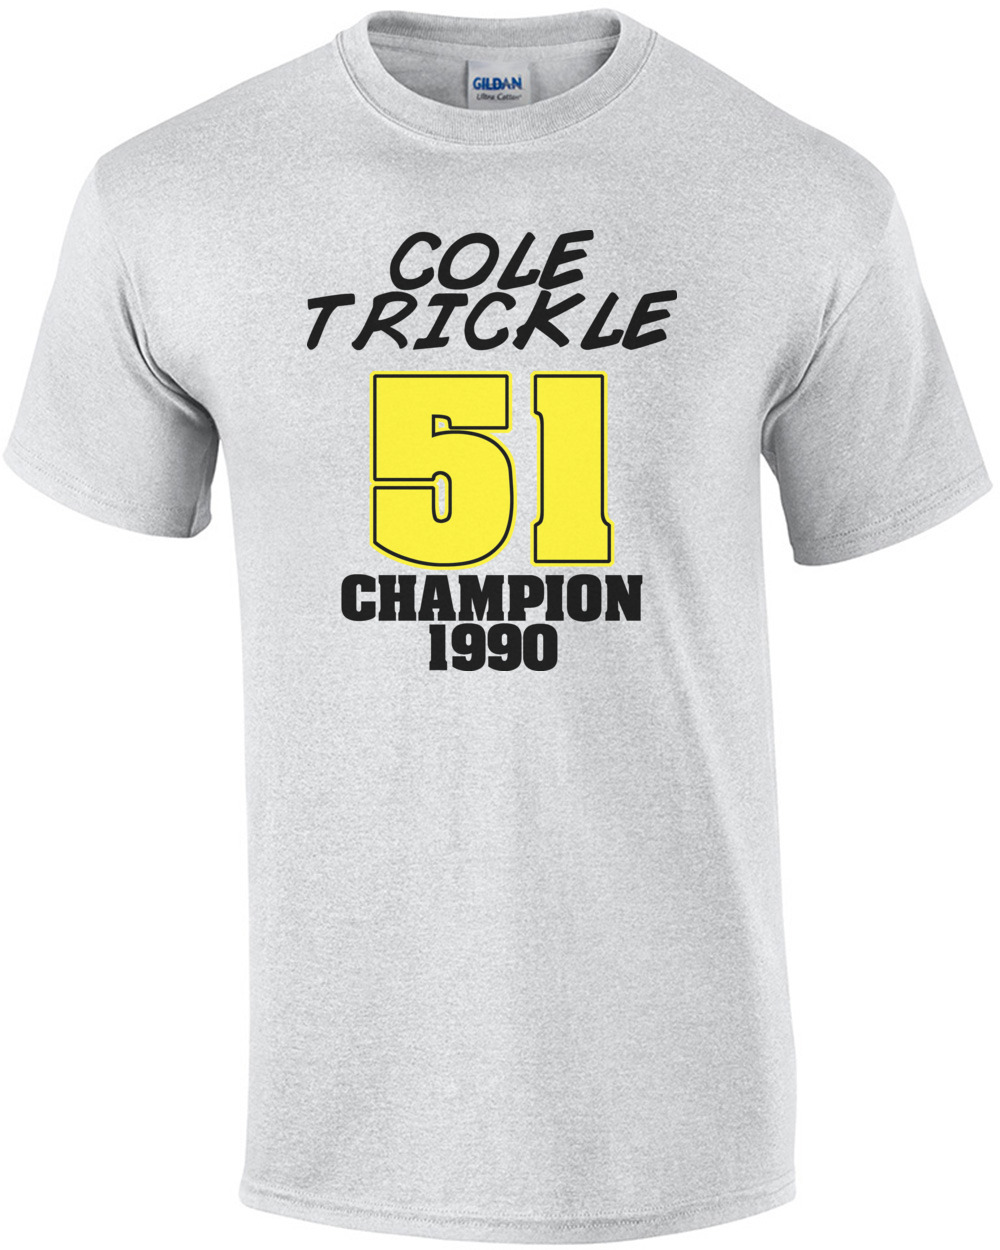 Details about   New Cole Trickle Days Of Thunder Movie Champion 1990 Logo Art T Shirt S-3XL 